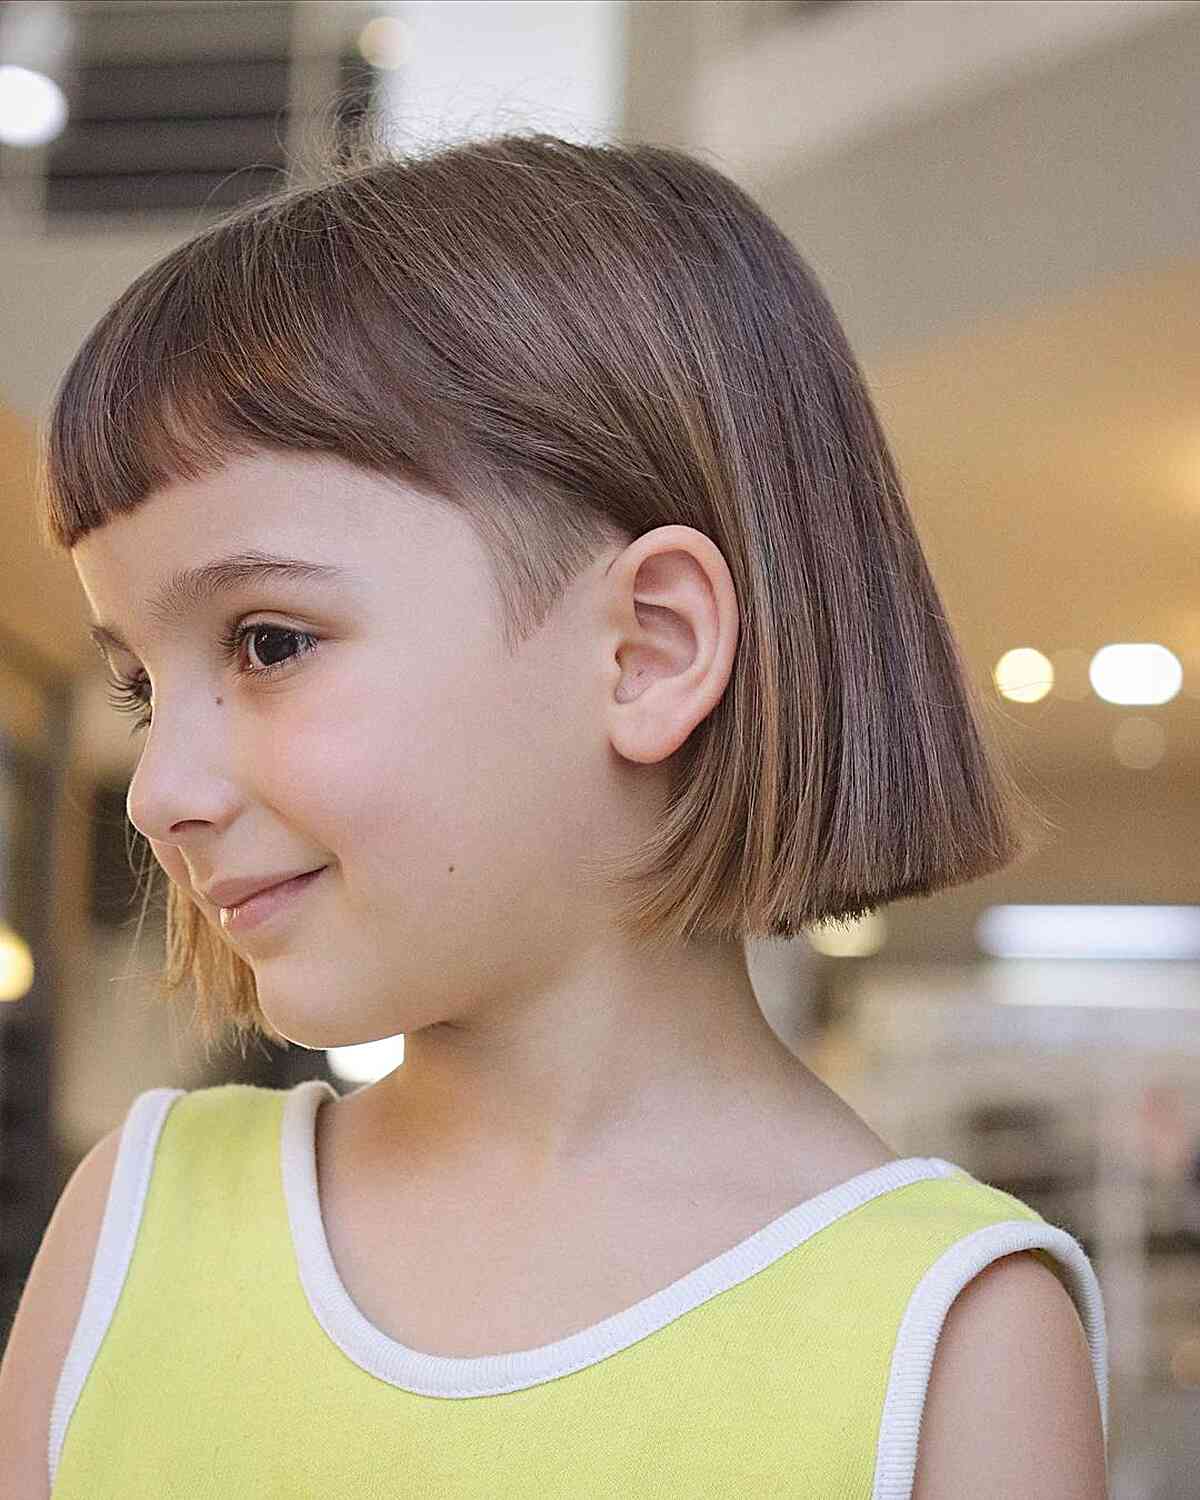 65 Cute Hairstyles for Little Girls Thatll Make Them Stand Out